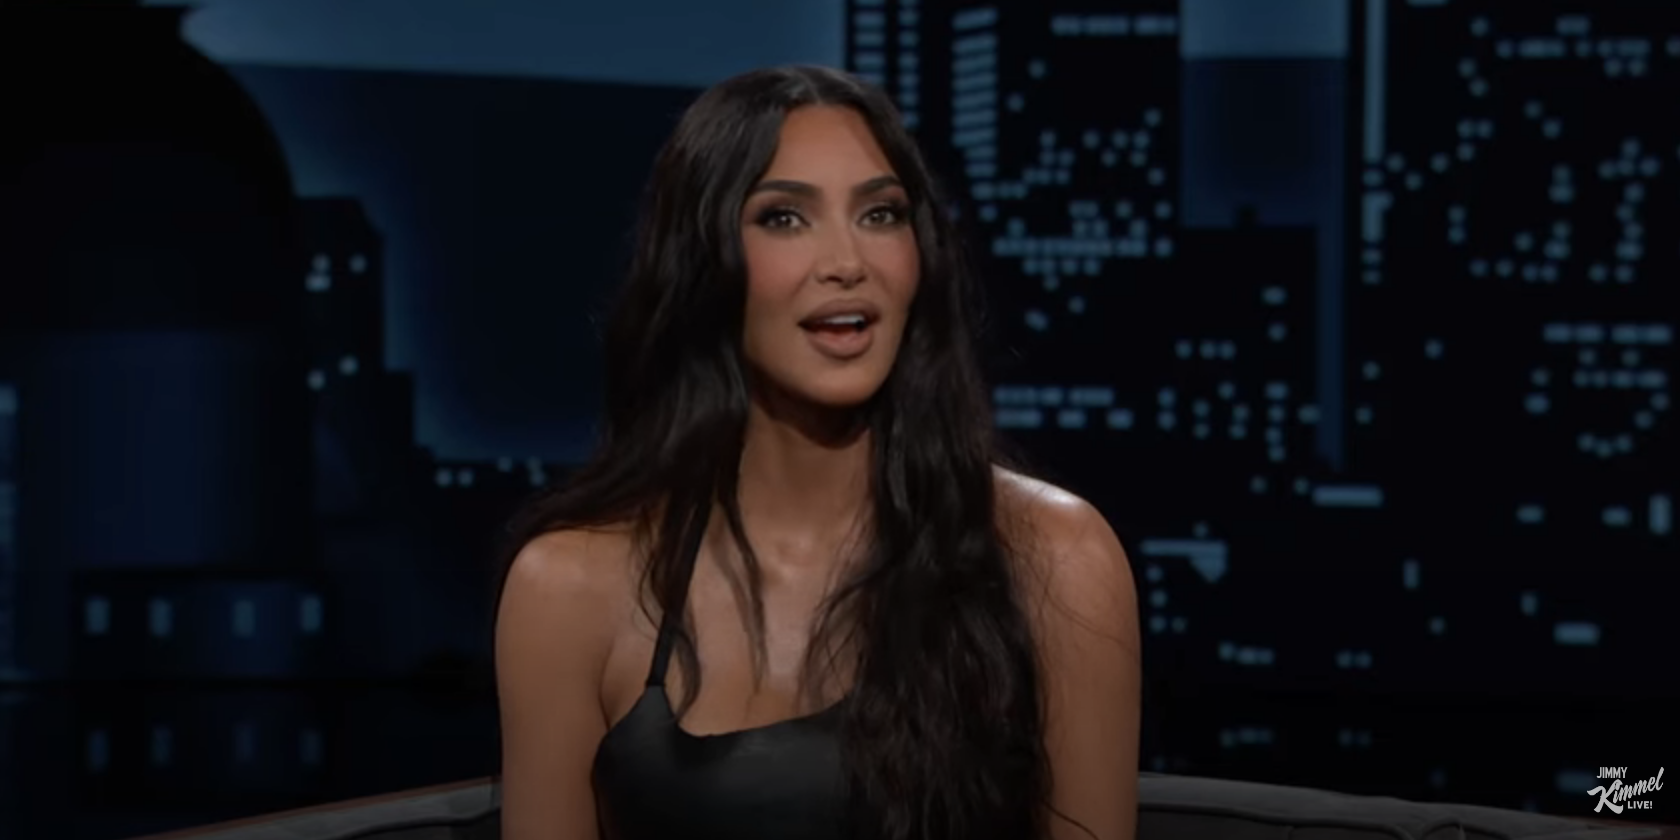 Kim Kardashian in a talk show setting, wearing a black top with a plunging neckline